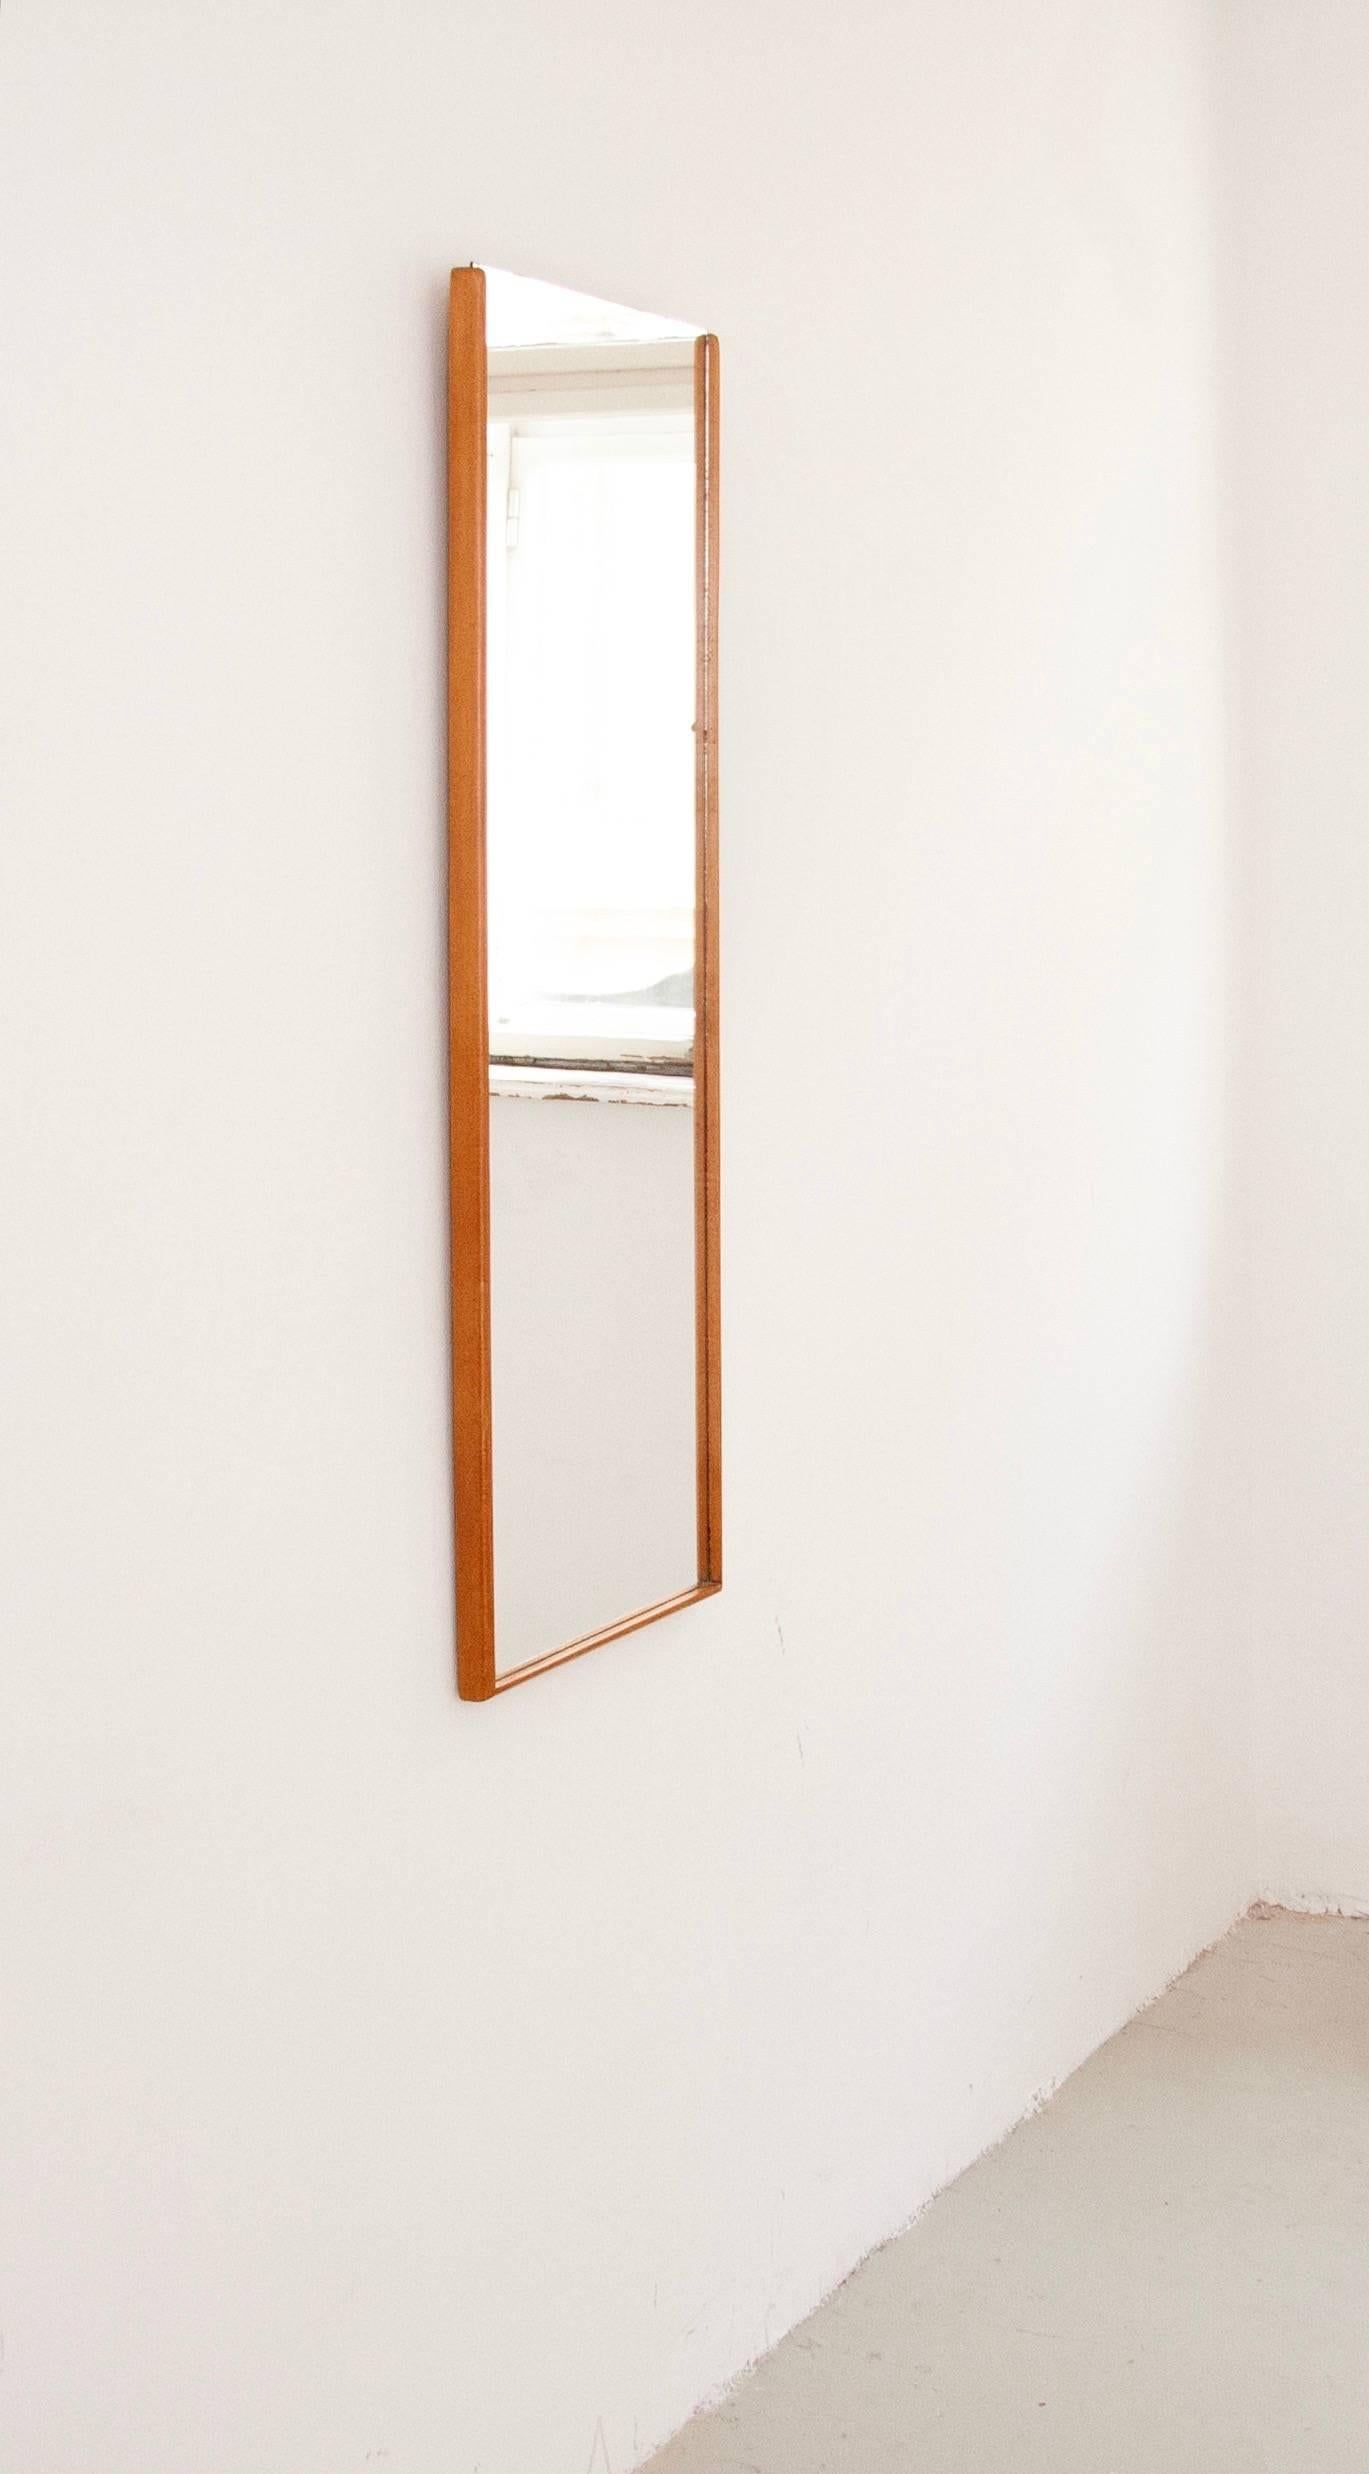 A wonderful and simple Austrian modernist wall mirror with a fine wooden frame from the 1950s. In excellent condition. 